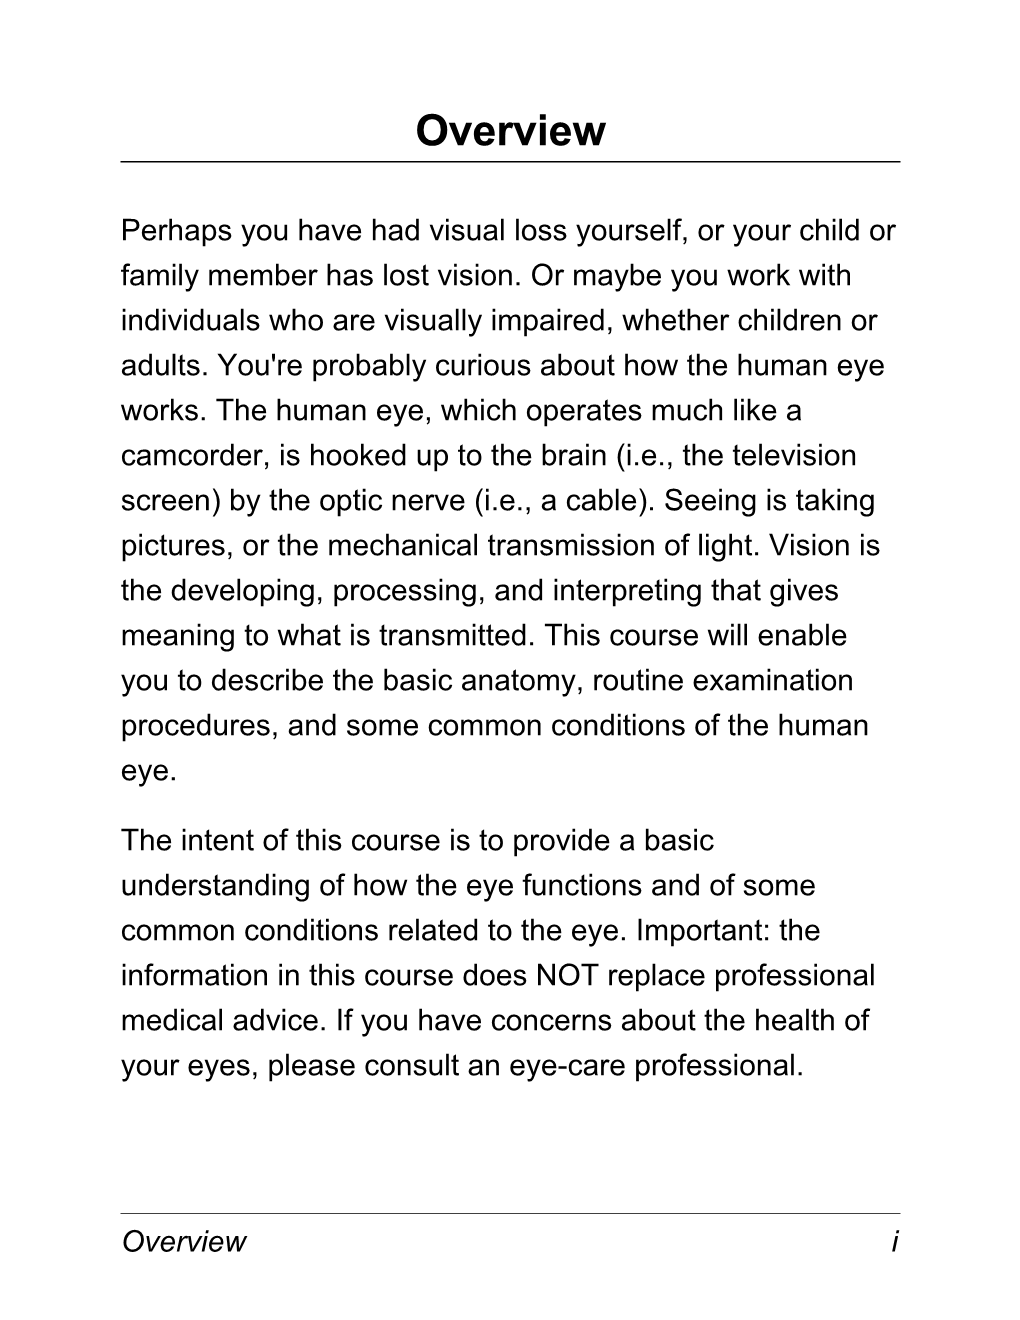 Perhaps You Have Had Visual Loss Yourself, Or Your Child Or Family Member Has Lost Vision